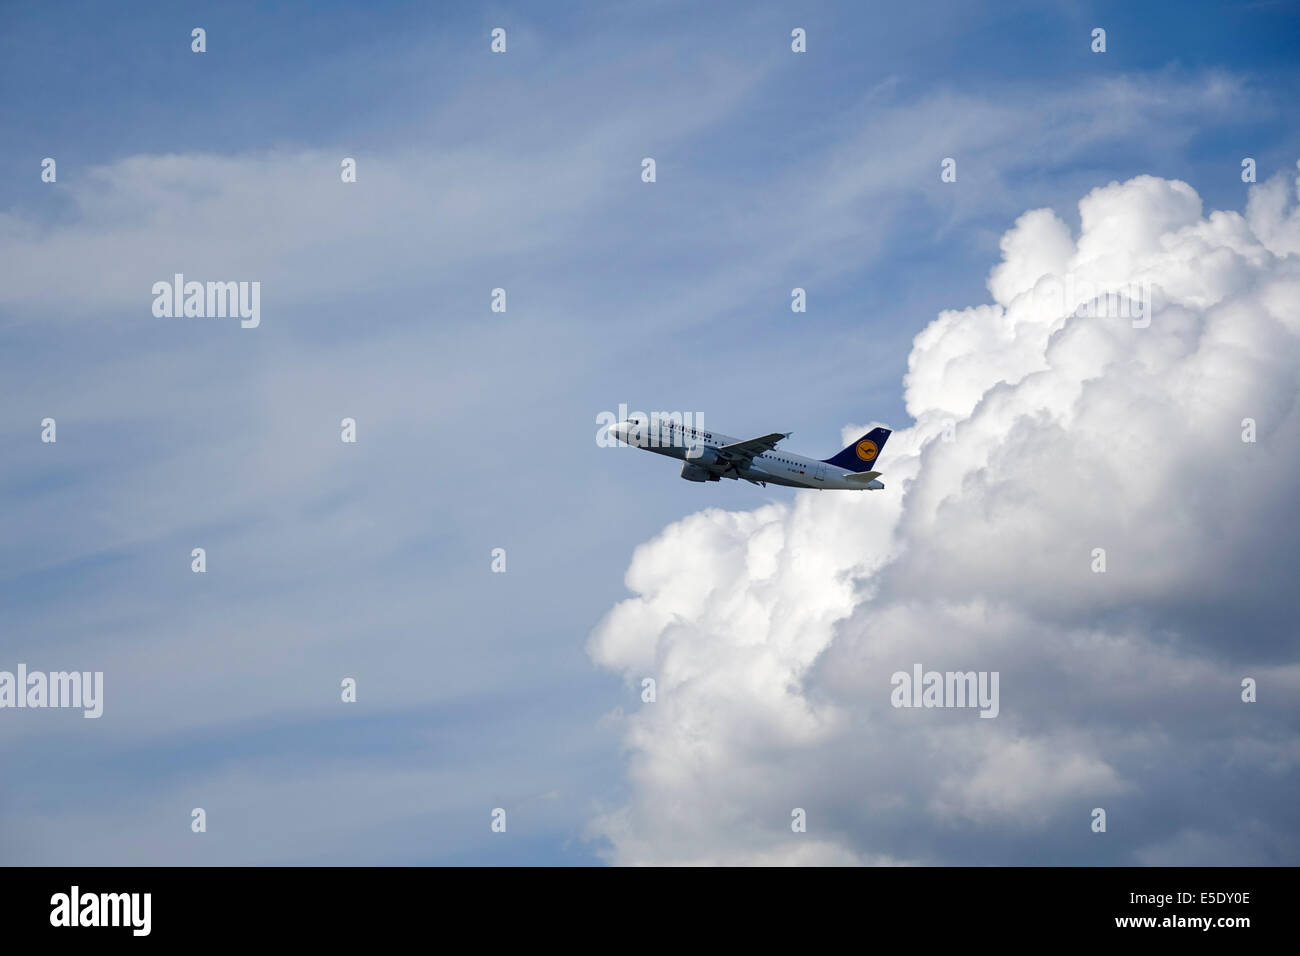 Lufthansa passenger aircraft after take-off from the airport in Munich, Bavaria, Germany, Europe Stock Photo